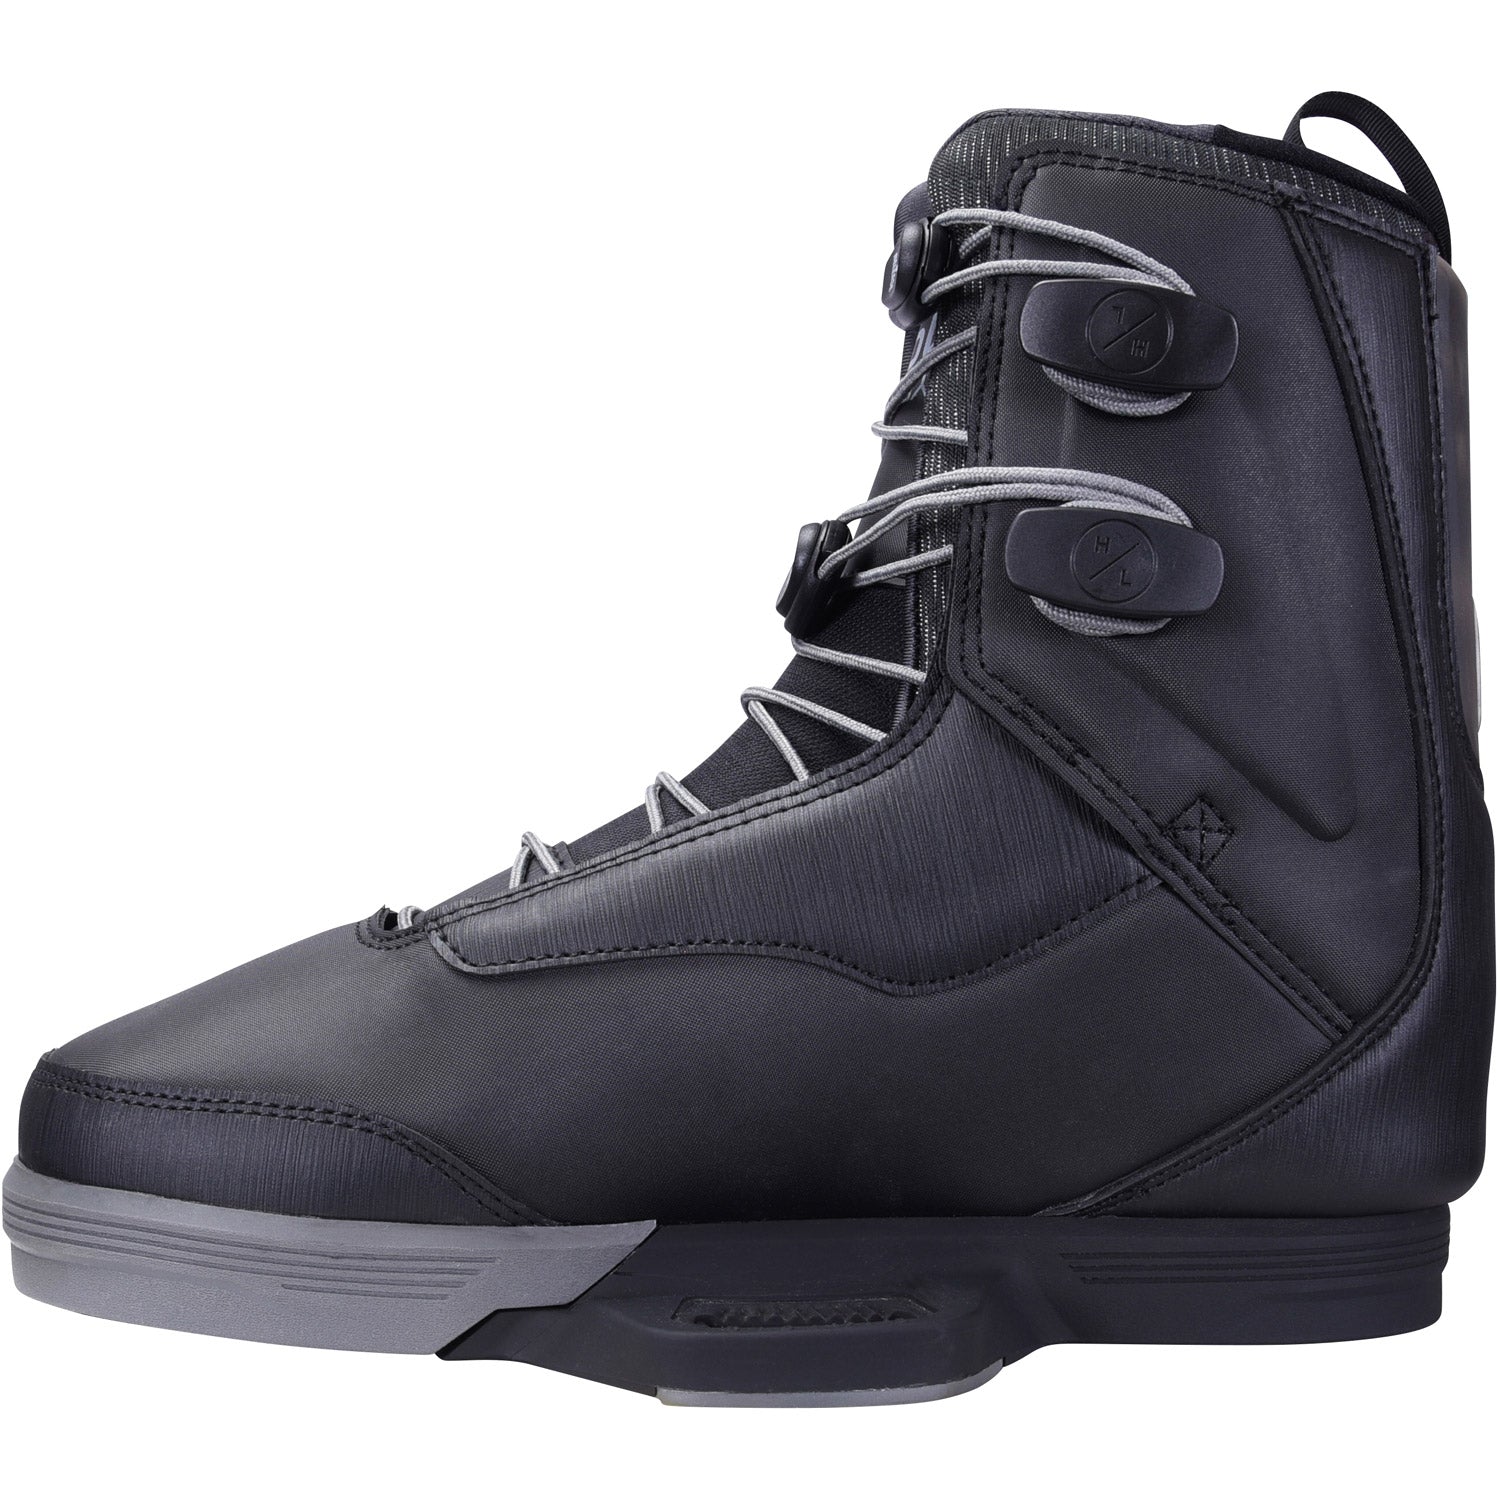 M60 Wakeboard Boots